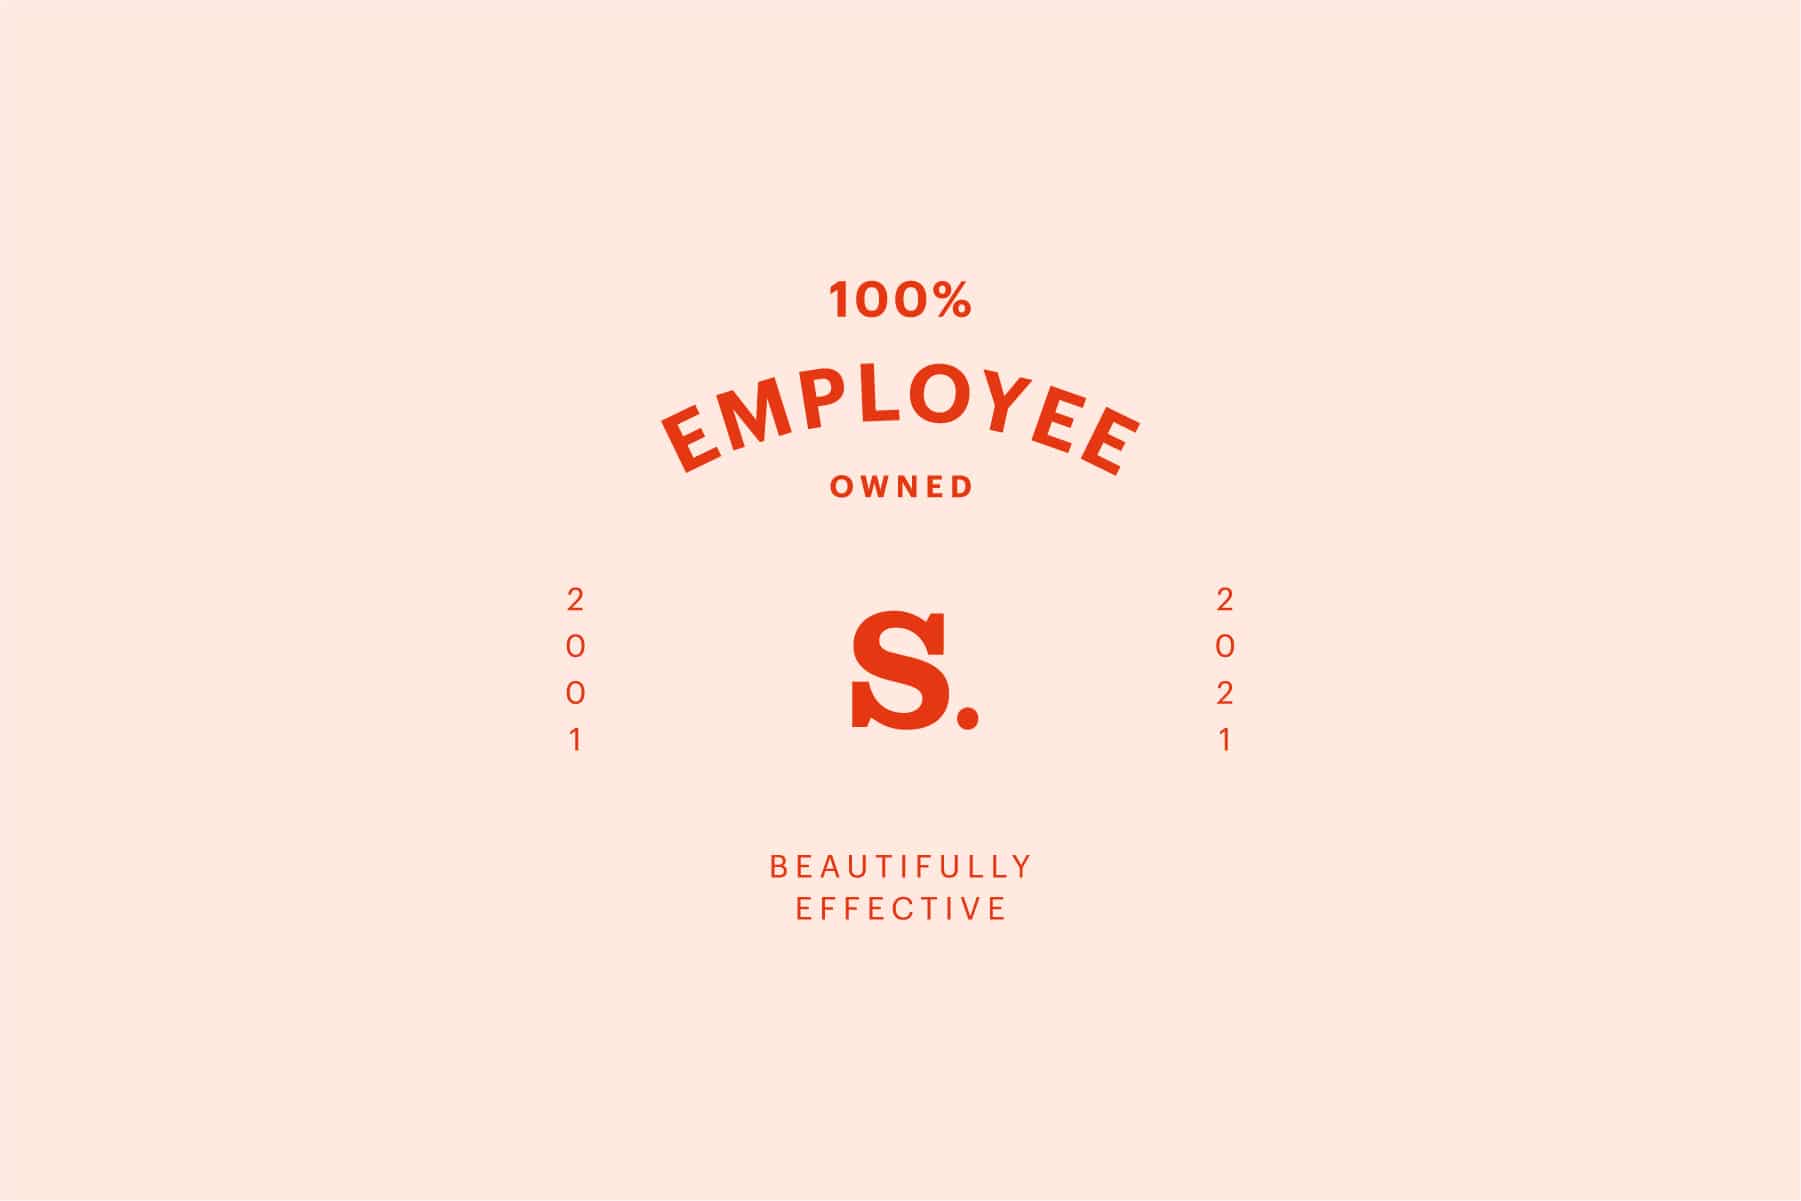 We are now 100% employee owned